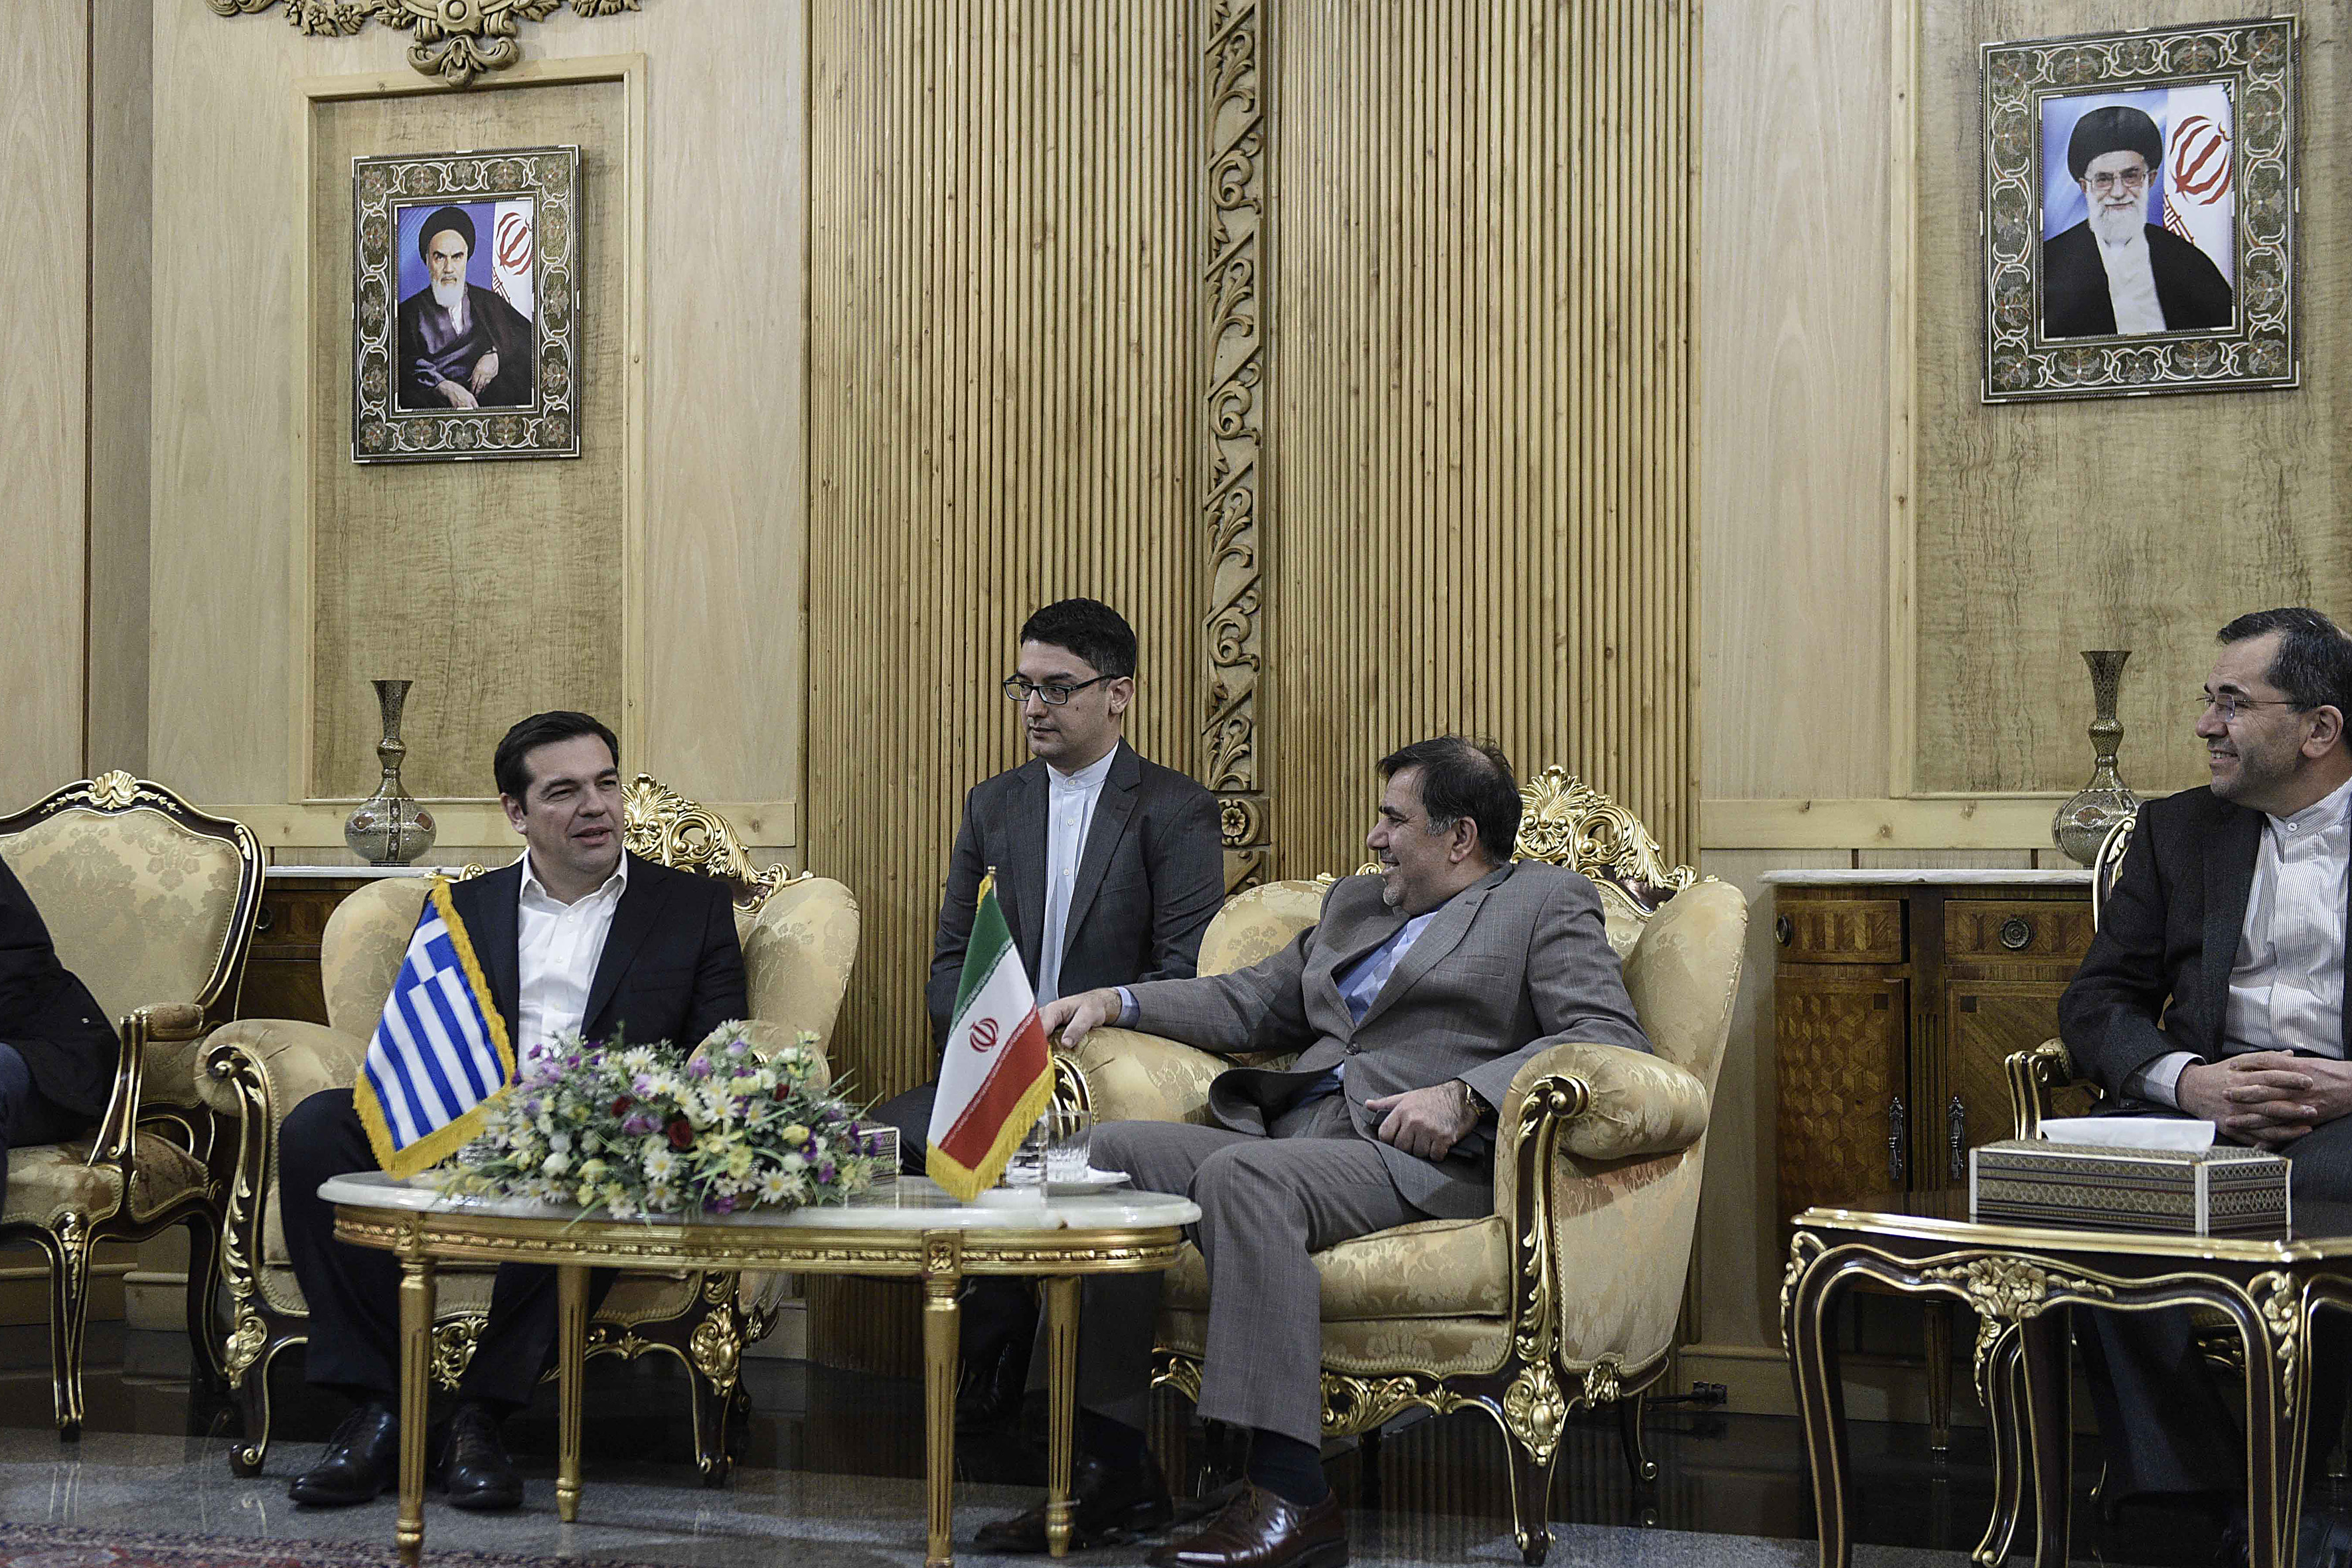 Greek government pleased with official visit to Iran